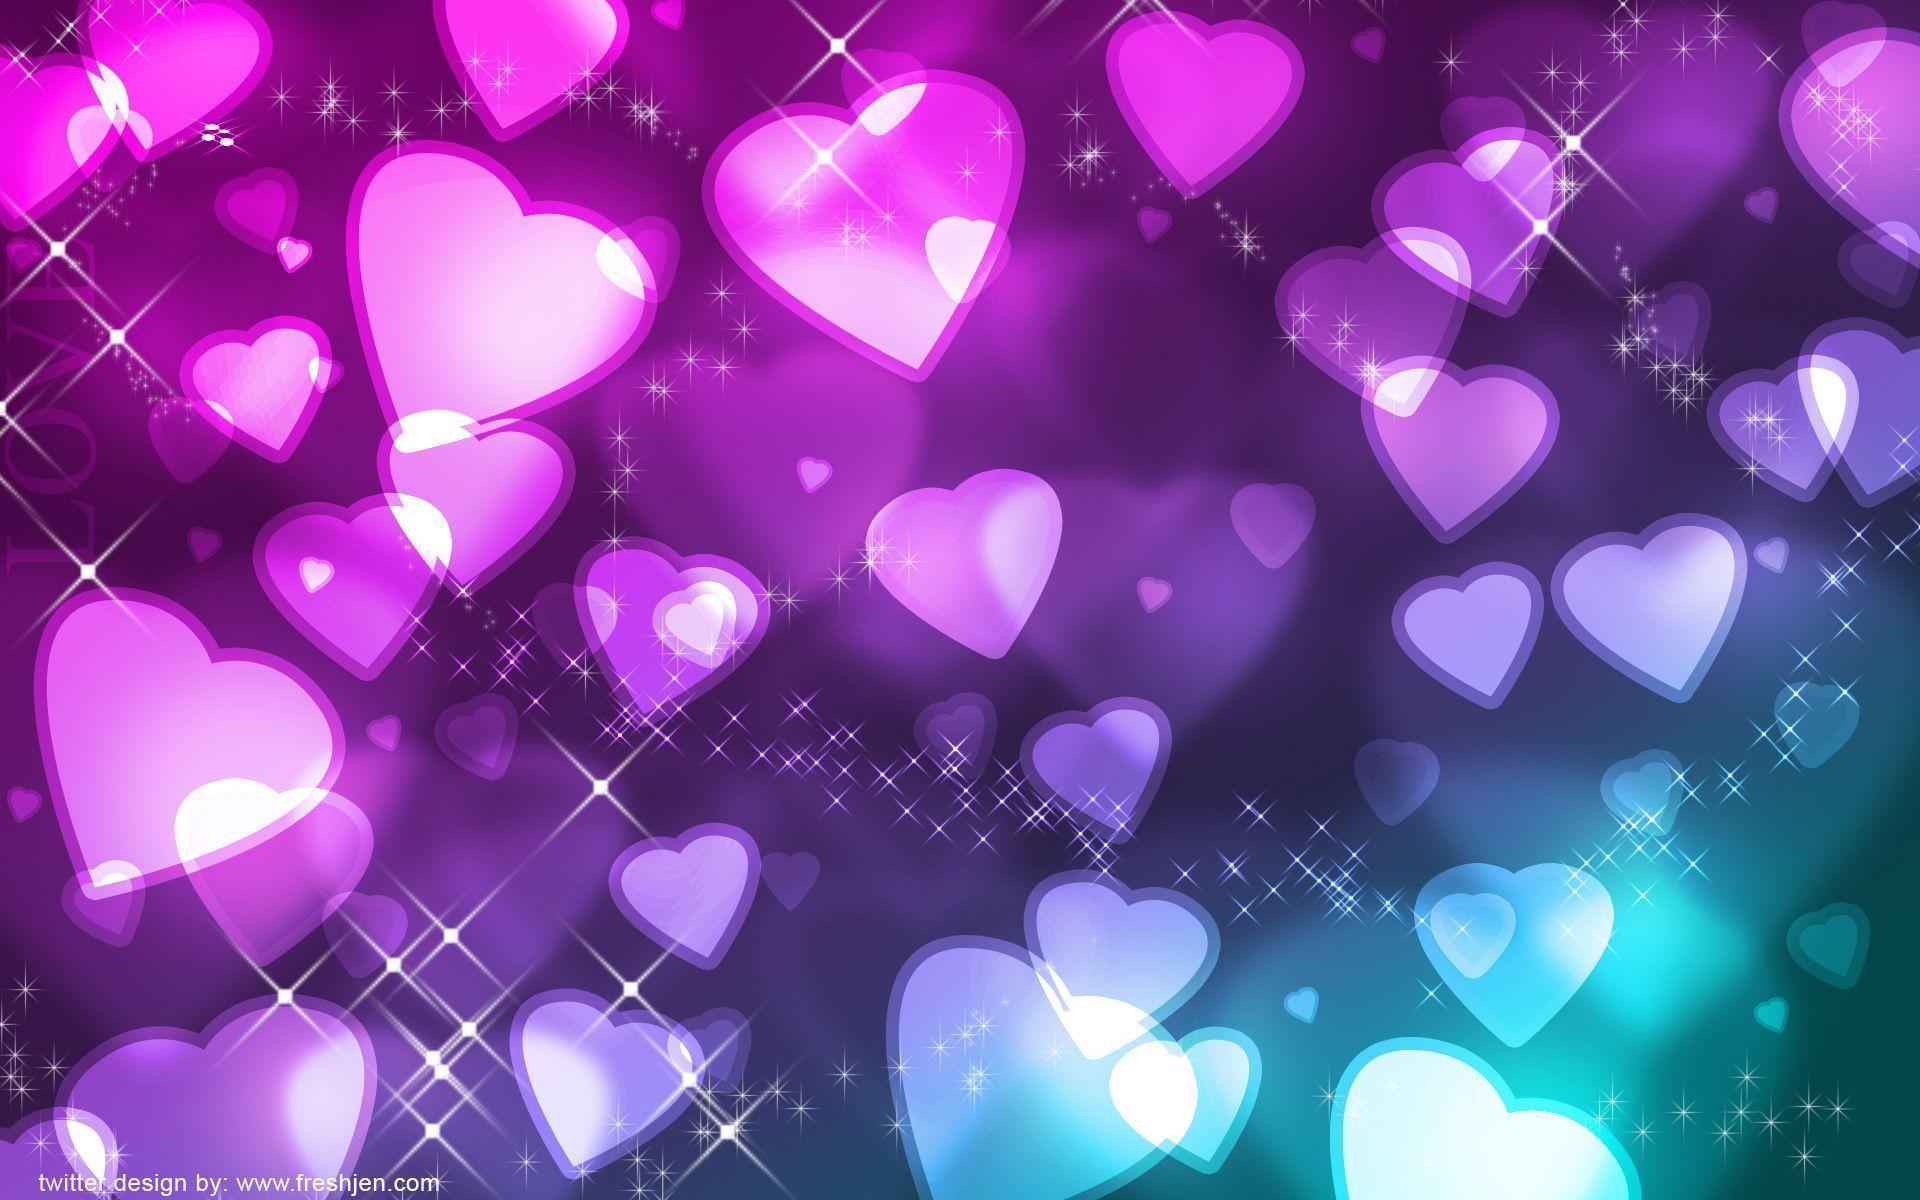 Wallpaper For > Purple And Blue Hearts Wallpaper